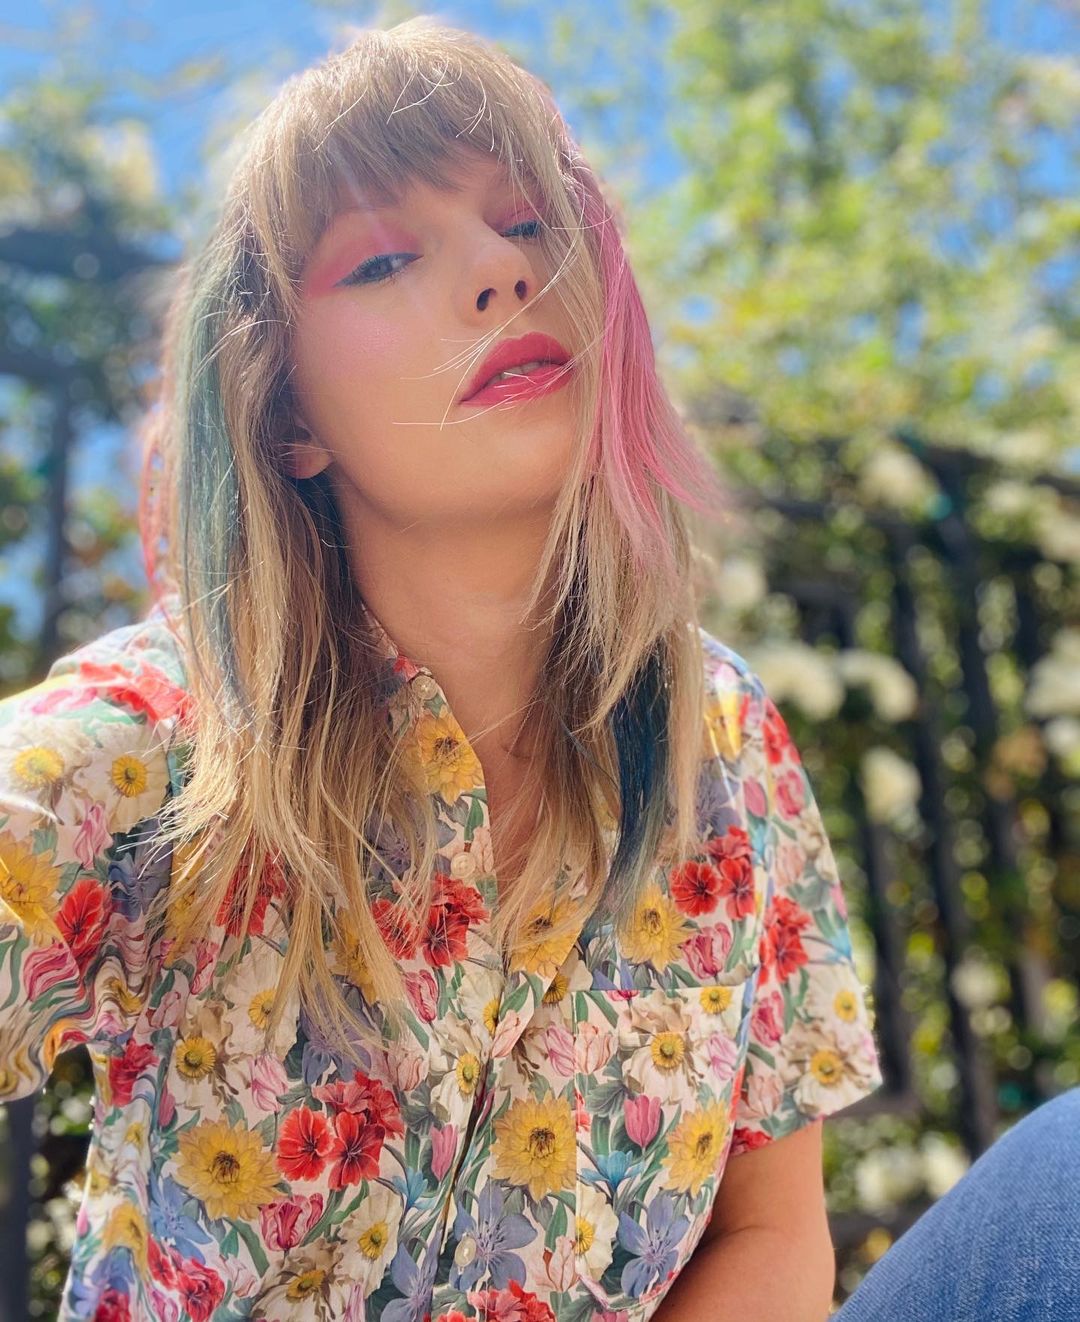 Taylor Swift has become a true cultural phenomenon, having a significant economic impact in North America. In the cities where the artist performed, there was a notable increase in the use of public transport and an explosion in hotel occupancy. (Photo:Instagram)